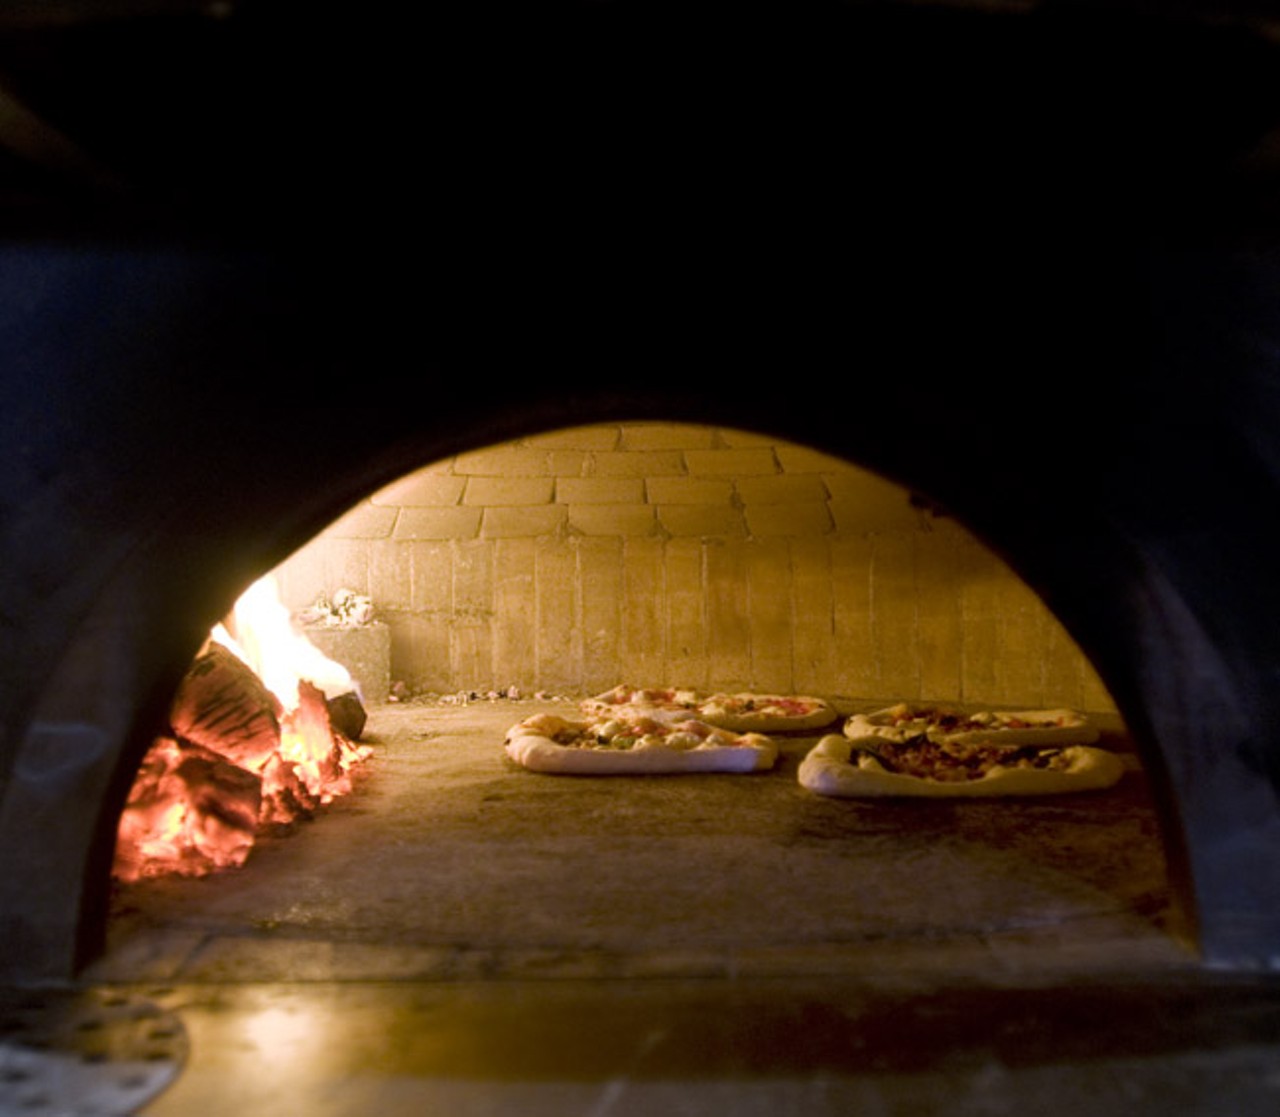 The beautiful brick oven. Crust Achin': Ian ventures forth in search of the good pizza and finds the Good Pie